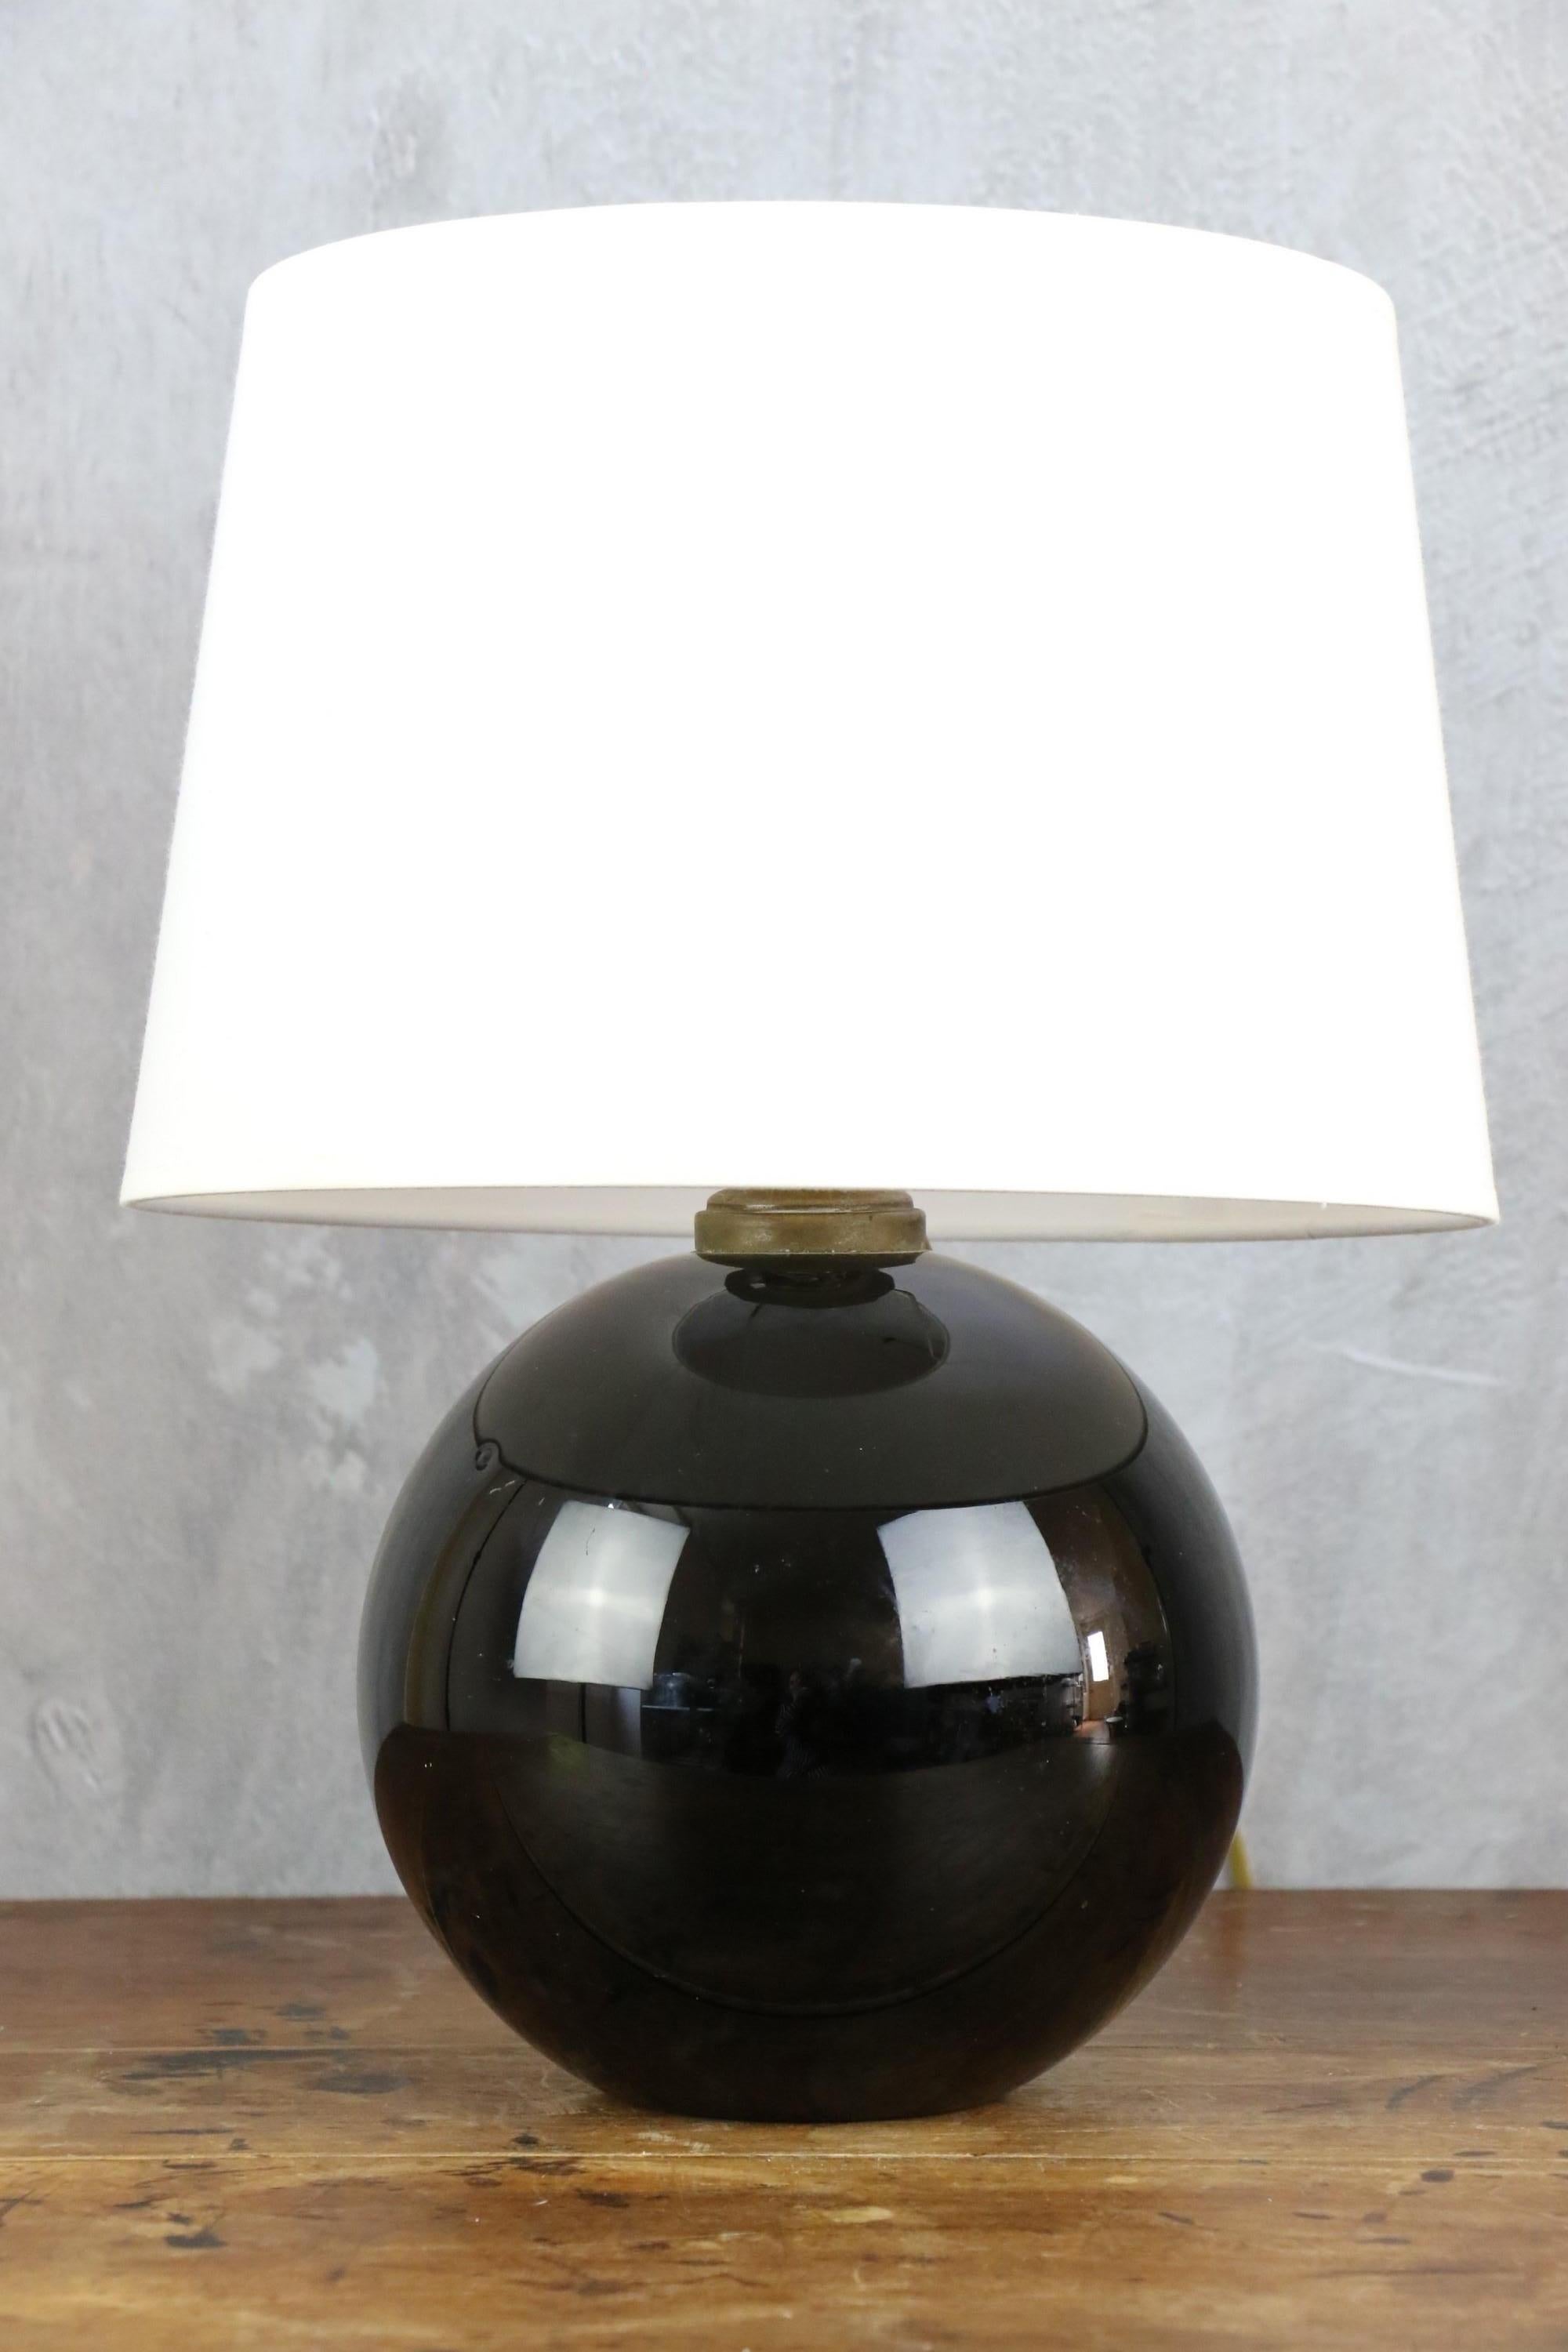 Table lamp by french designer Jacques Adnet.
Black opaline glass with brass details, fabric shade.
Made in France in the 1930s.

Nice Art Deco table lamp.

1x B22 socket and EU plug.

Measurements  : 
Height with shade: H 39 cm (27cm without